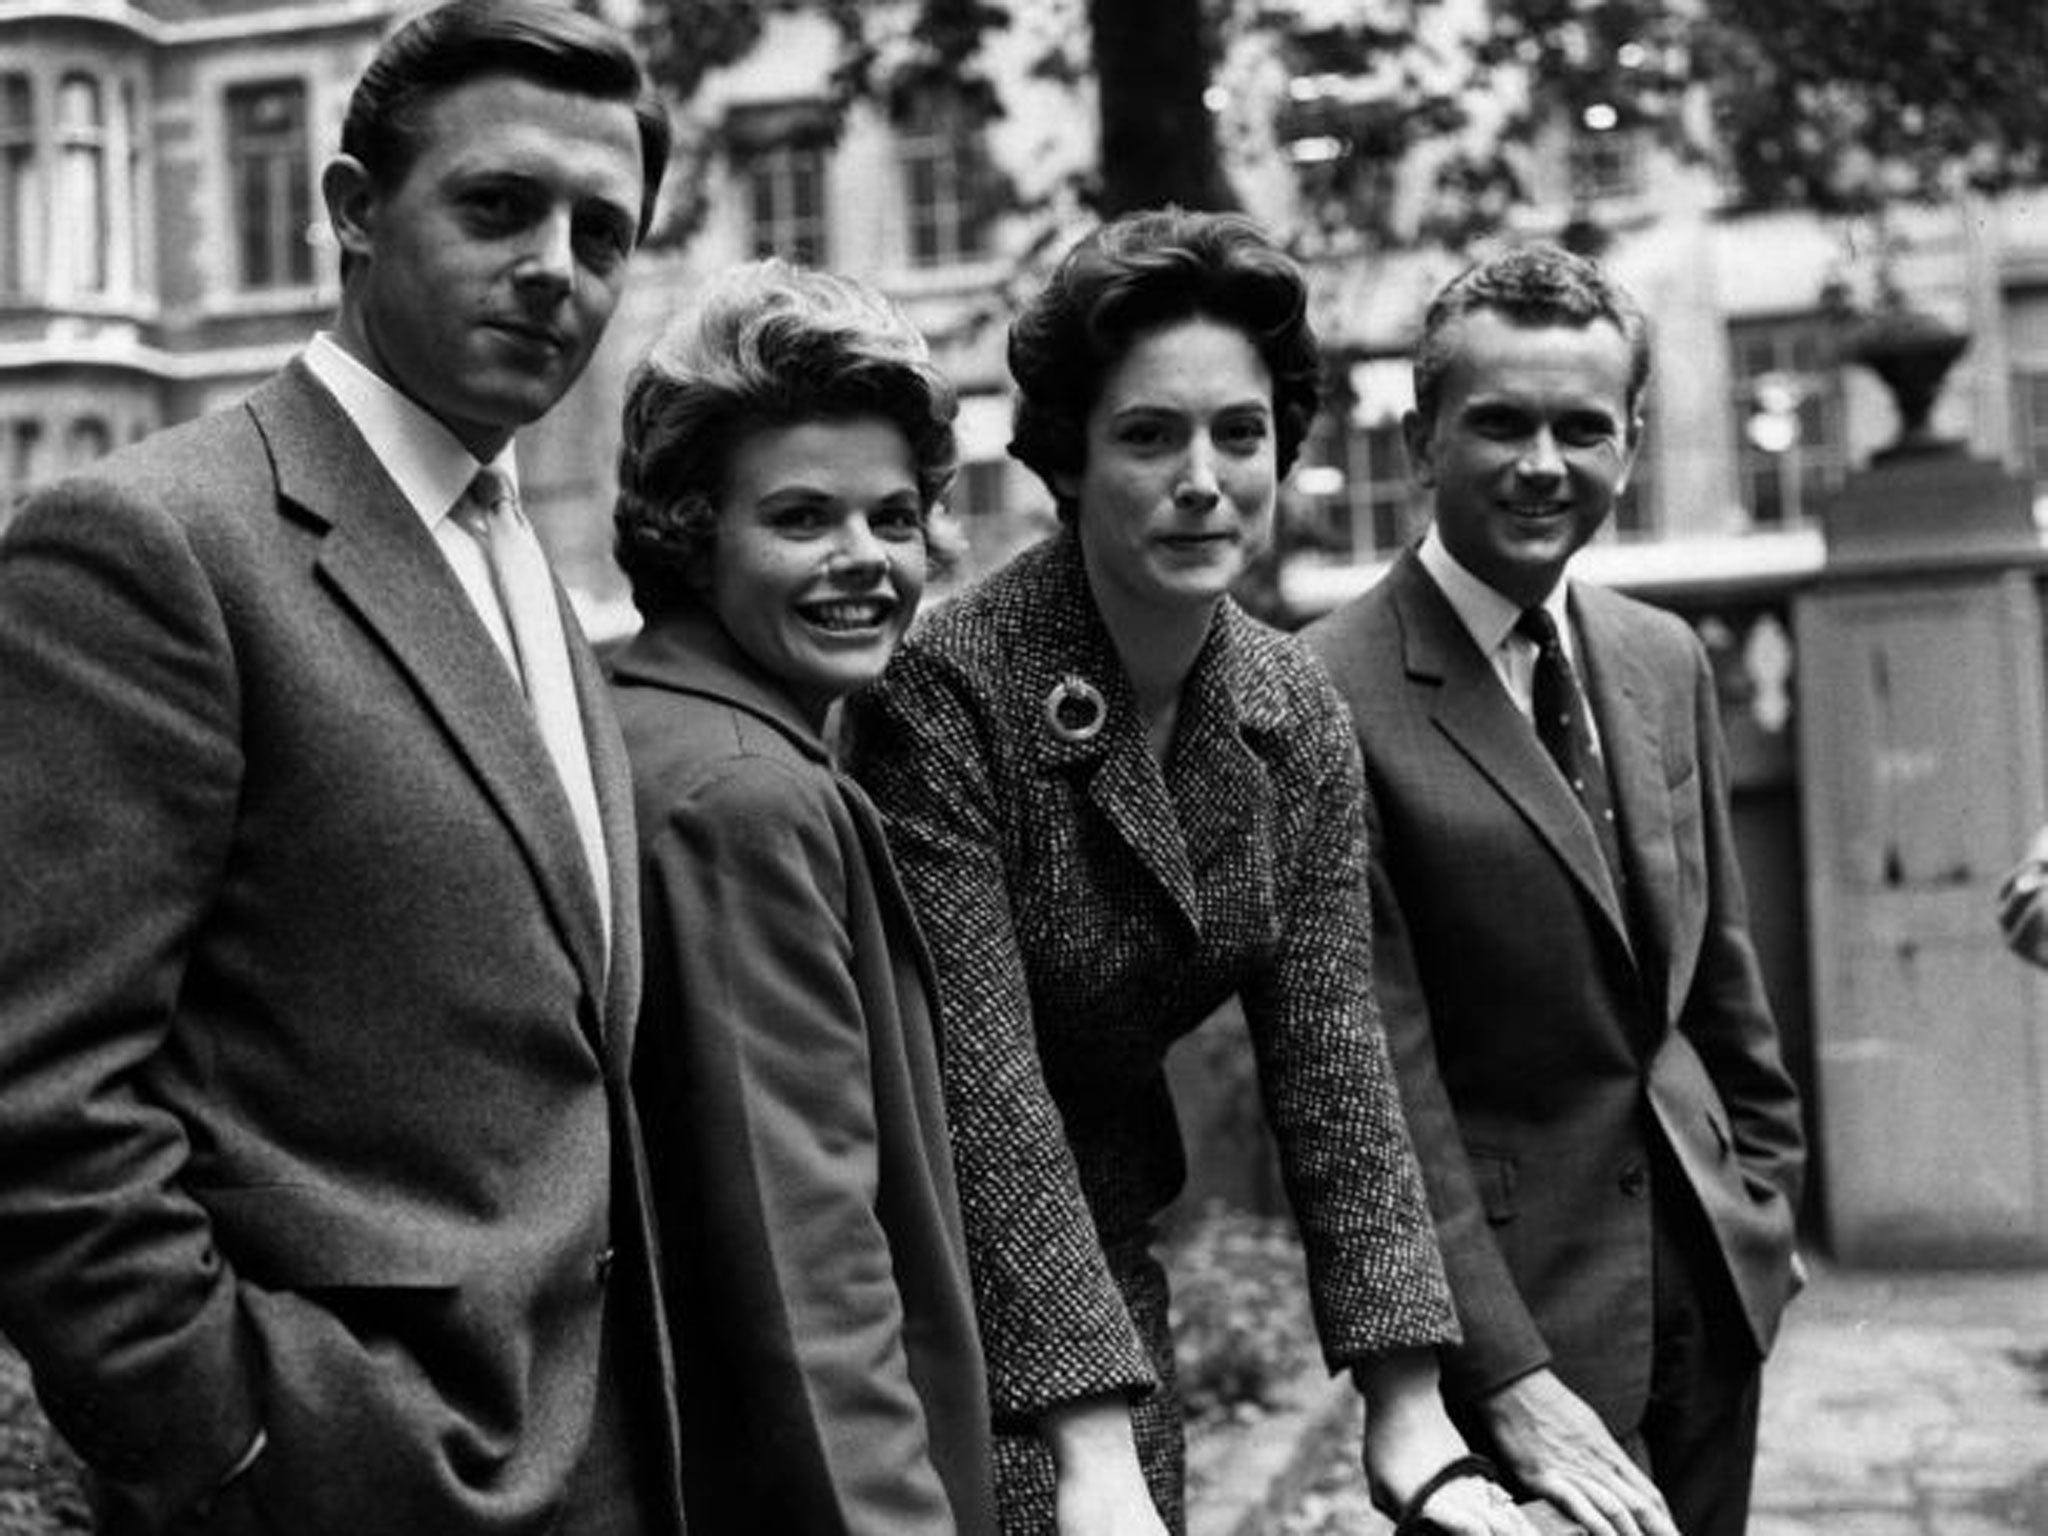 Kendall. right, in 1960 with BBC colleagues Michael Aspel, Judith Chalmers and Nan Winton